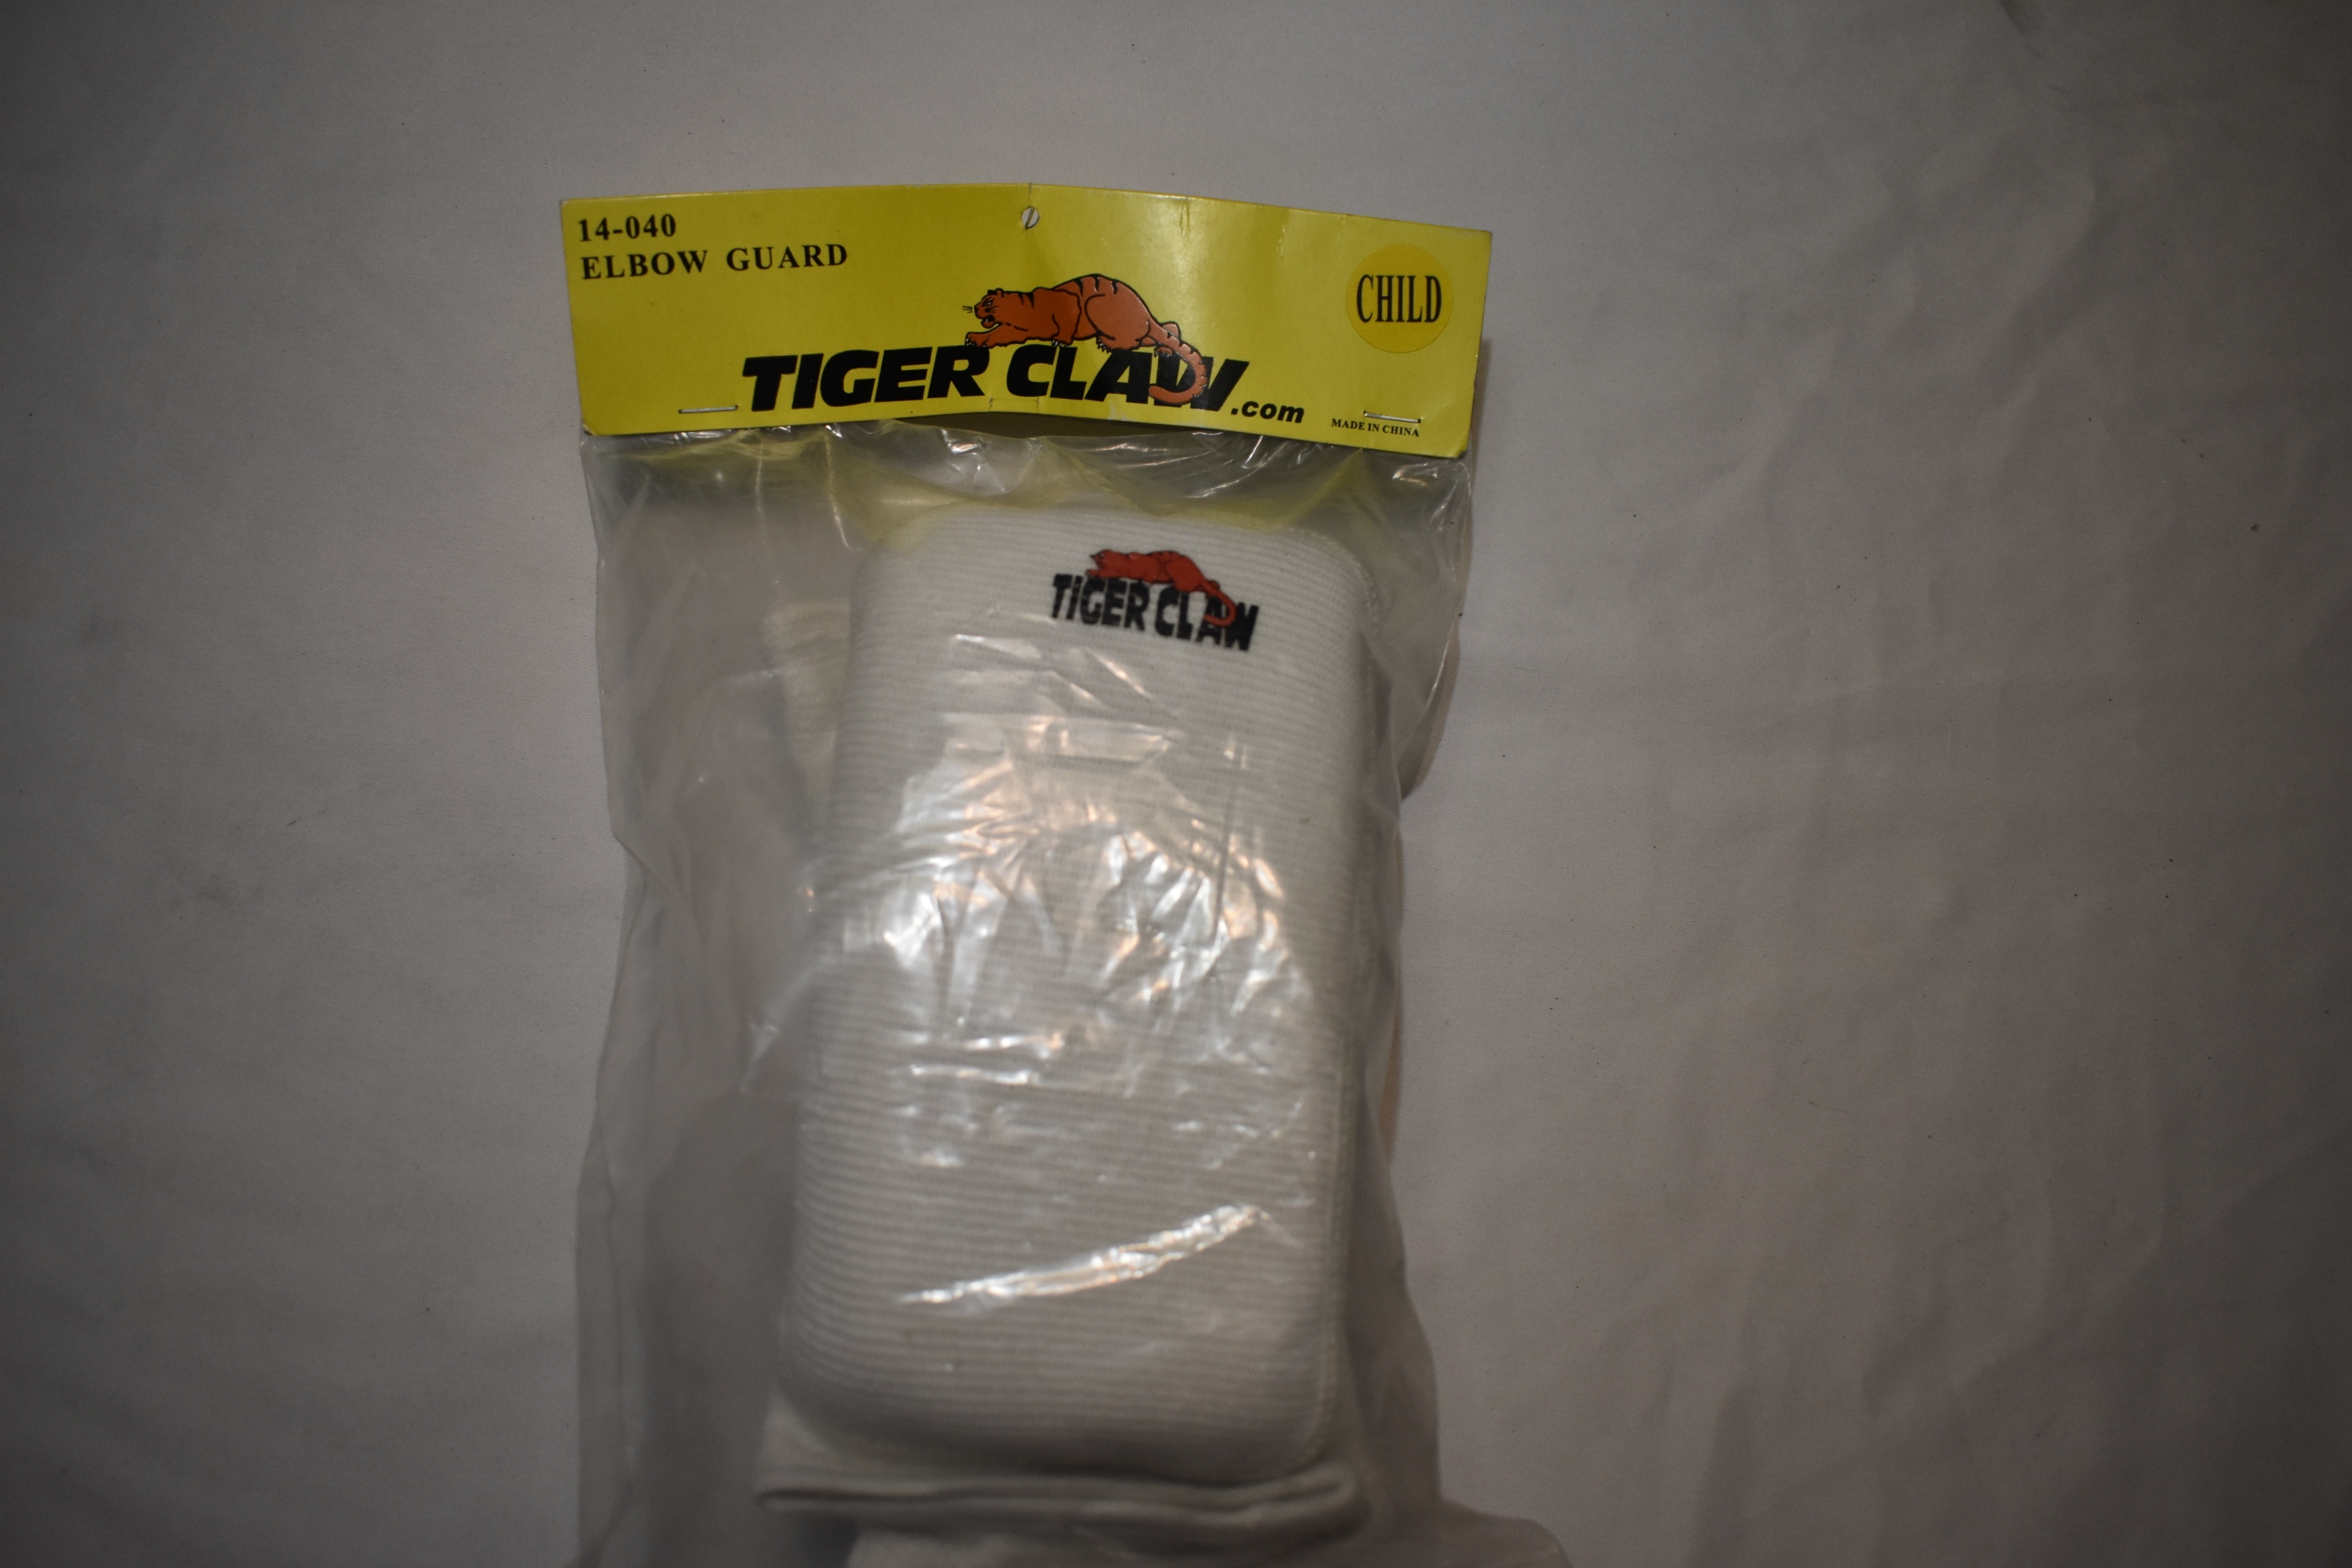 NEW - Tiger Claw Elbow Pads, White, Youth